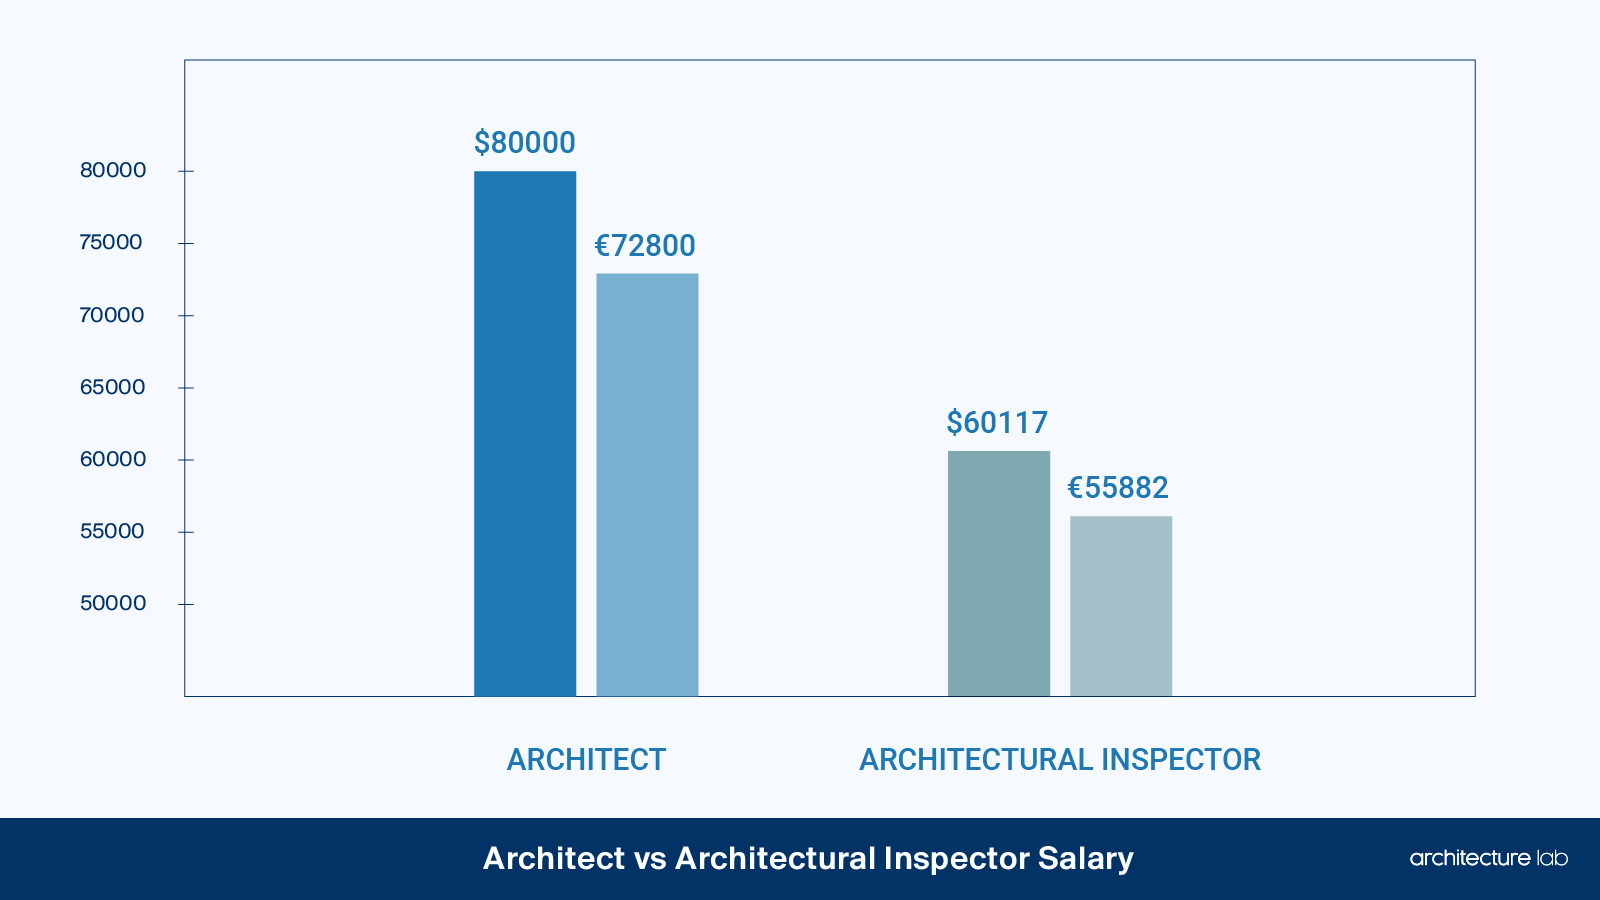 Architect vs architectural inspector: differences, similarities, duties, salaries, and education